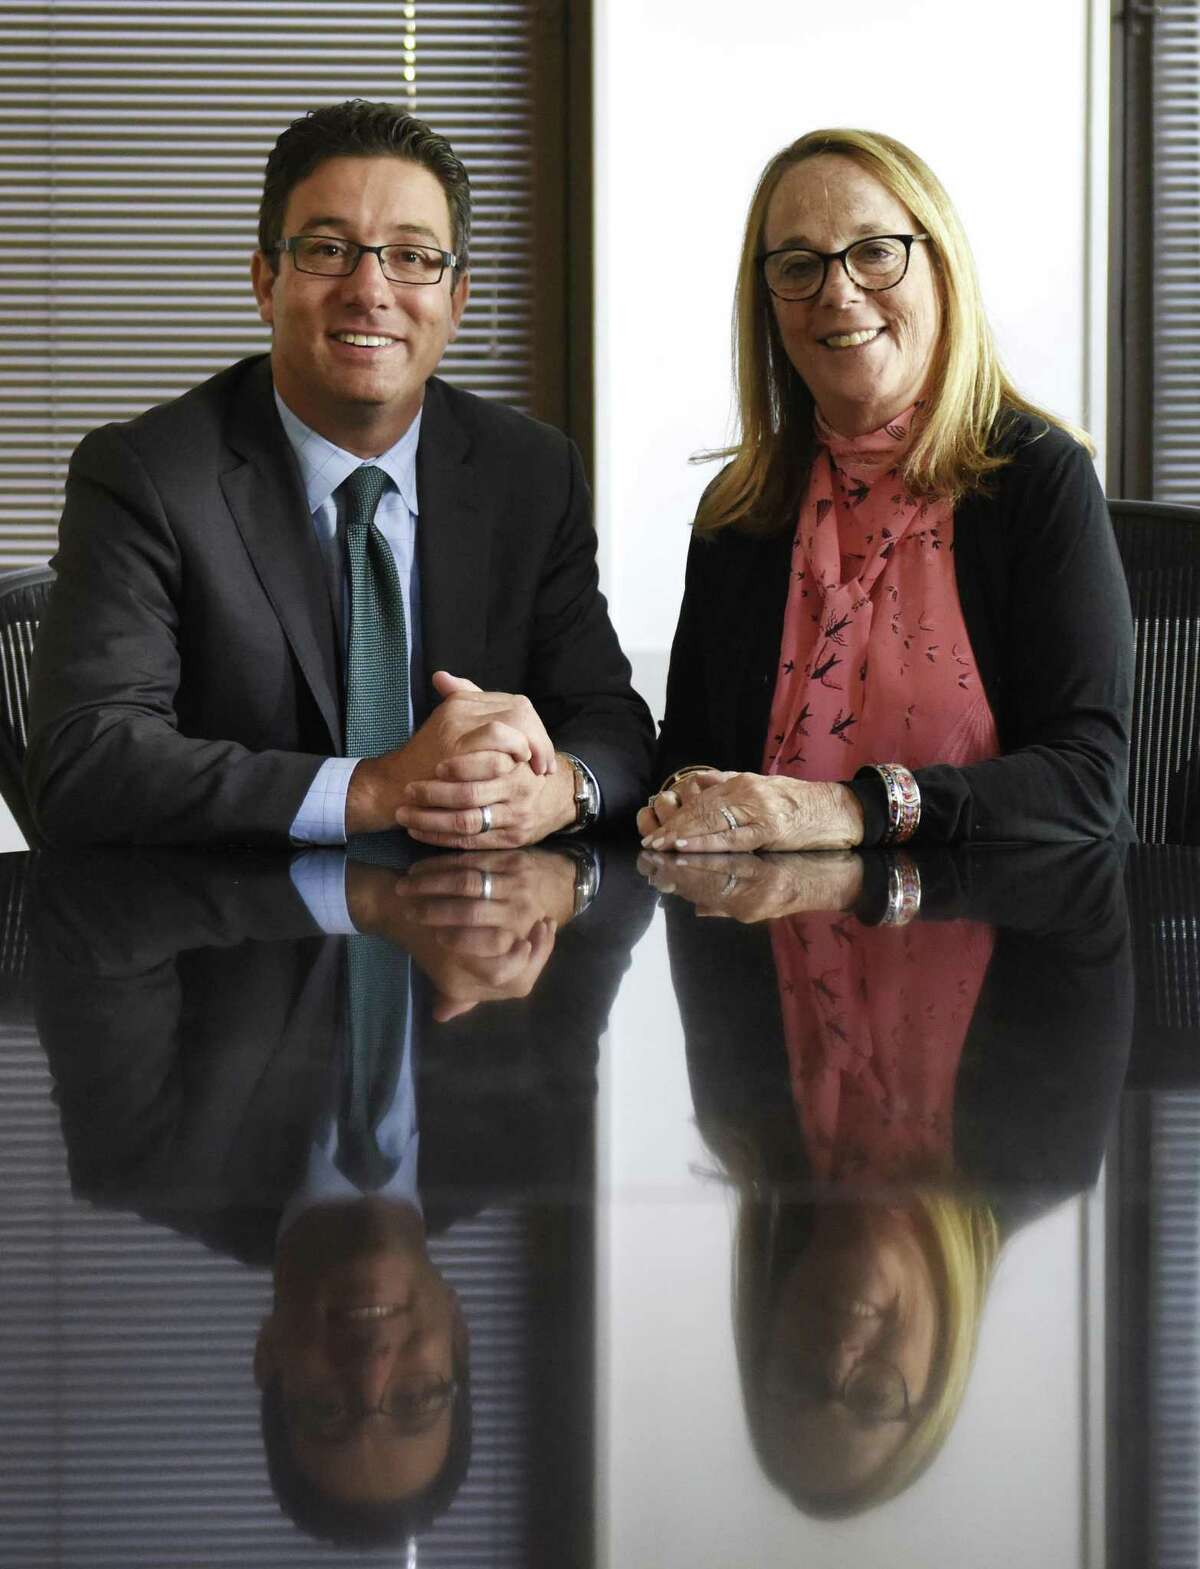 Eric J. Broder and Carole Topol Orland, of Broder & Orland Divorce & Family Law, pose at their new office in Greenwich, Conn. Wednesday, July 5, 2017. Broder & Orland, based in Westport, just opened a new full-sized office in Greenwich at 115 East Putnam Ave.